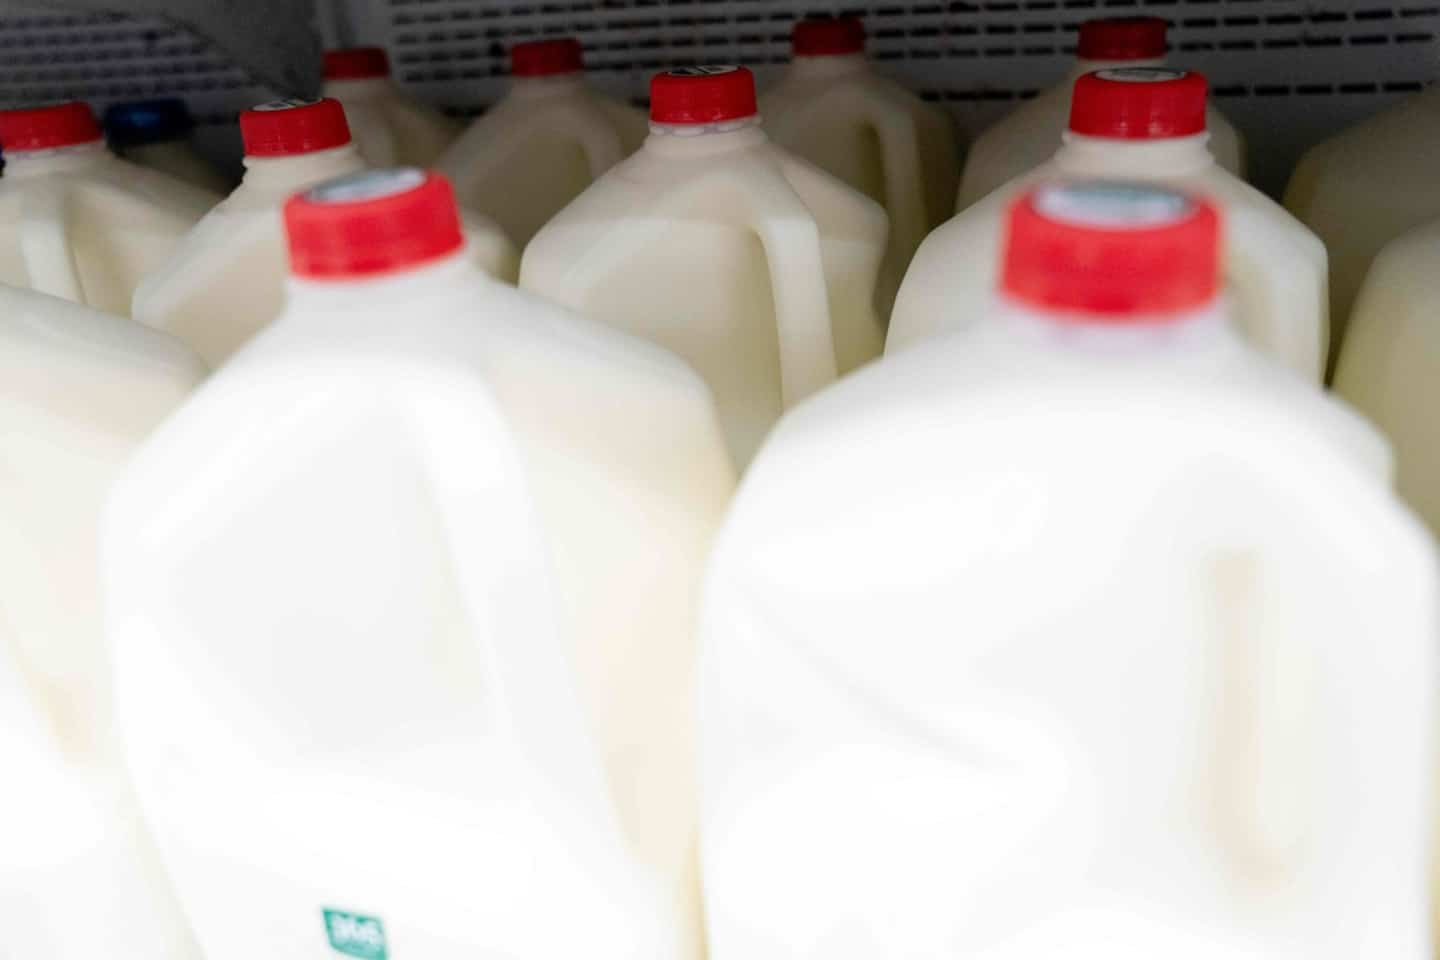 An increase of 2 cents per liter of milk